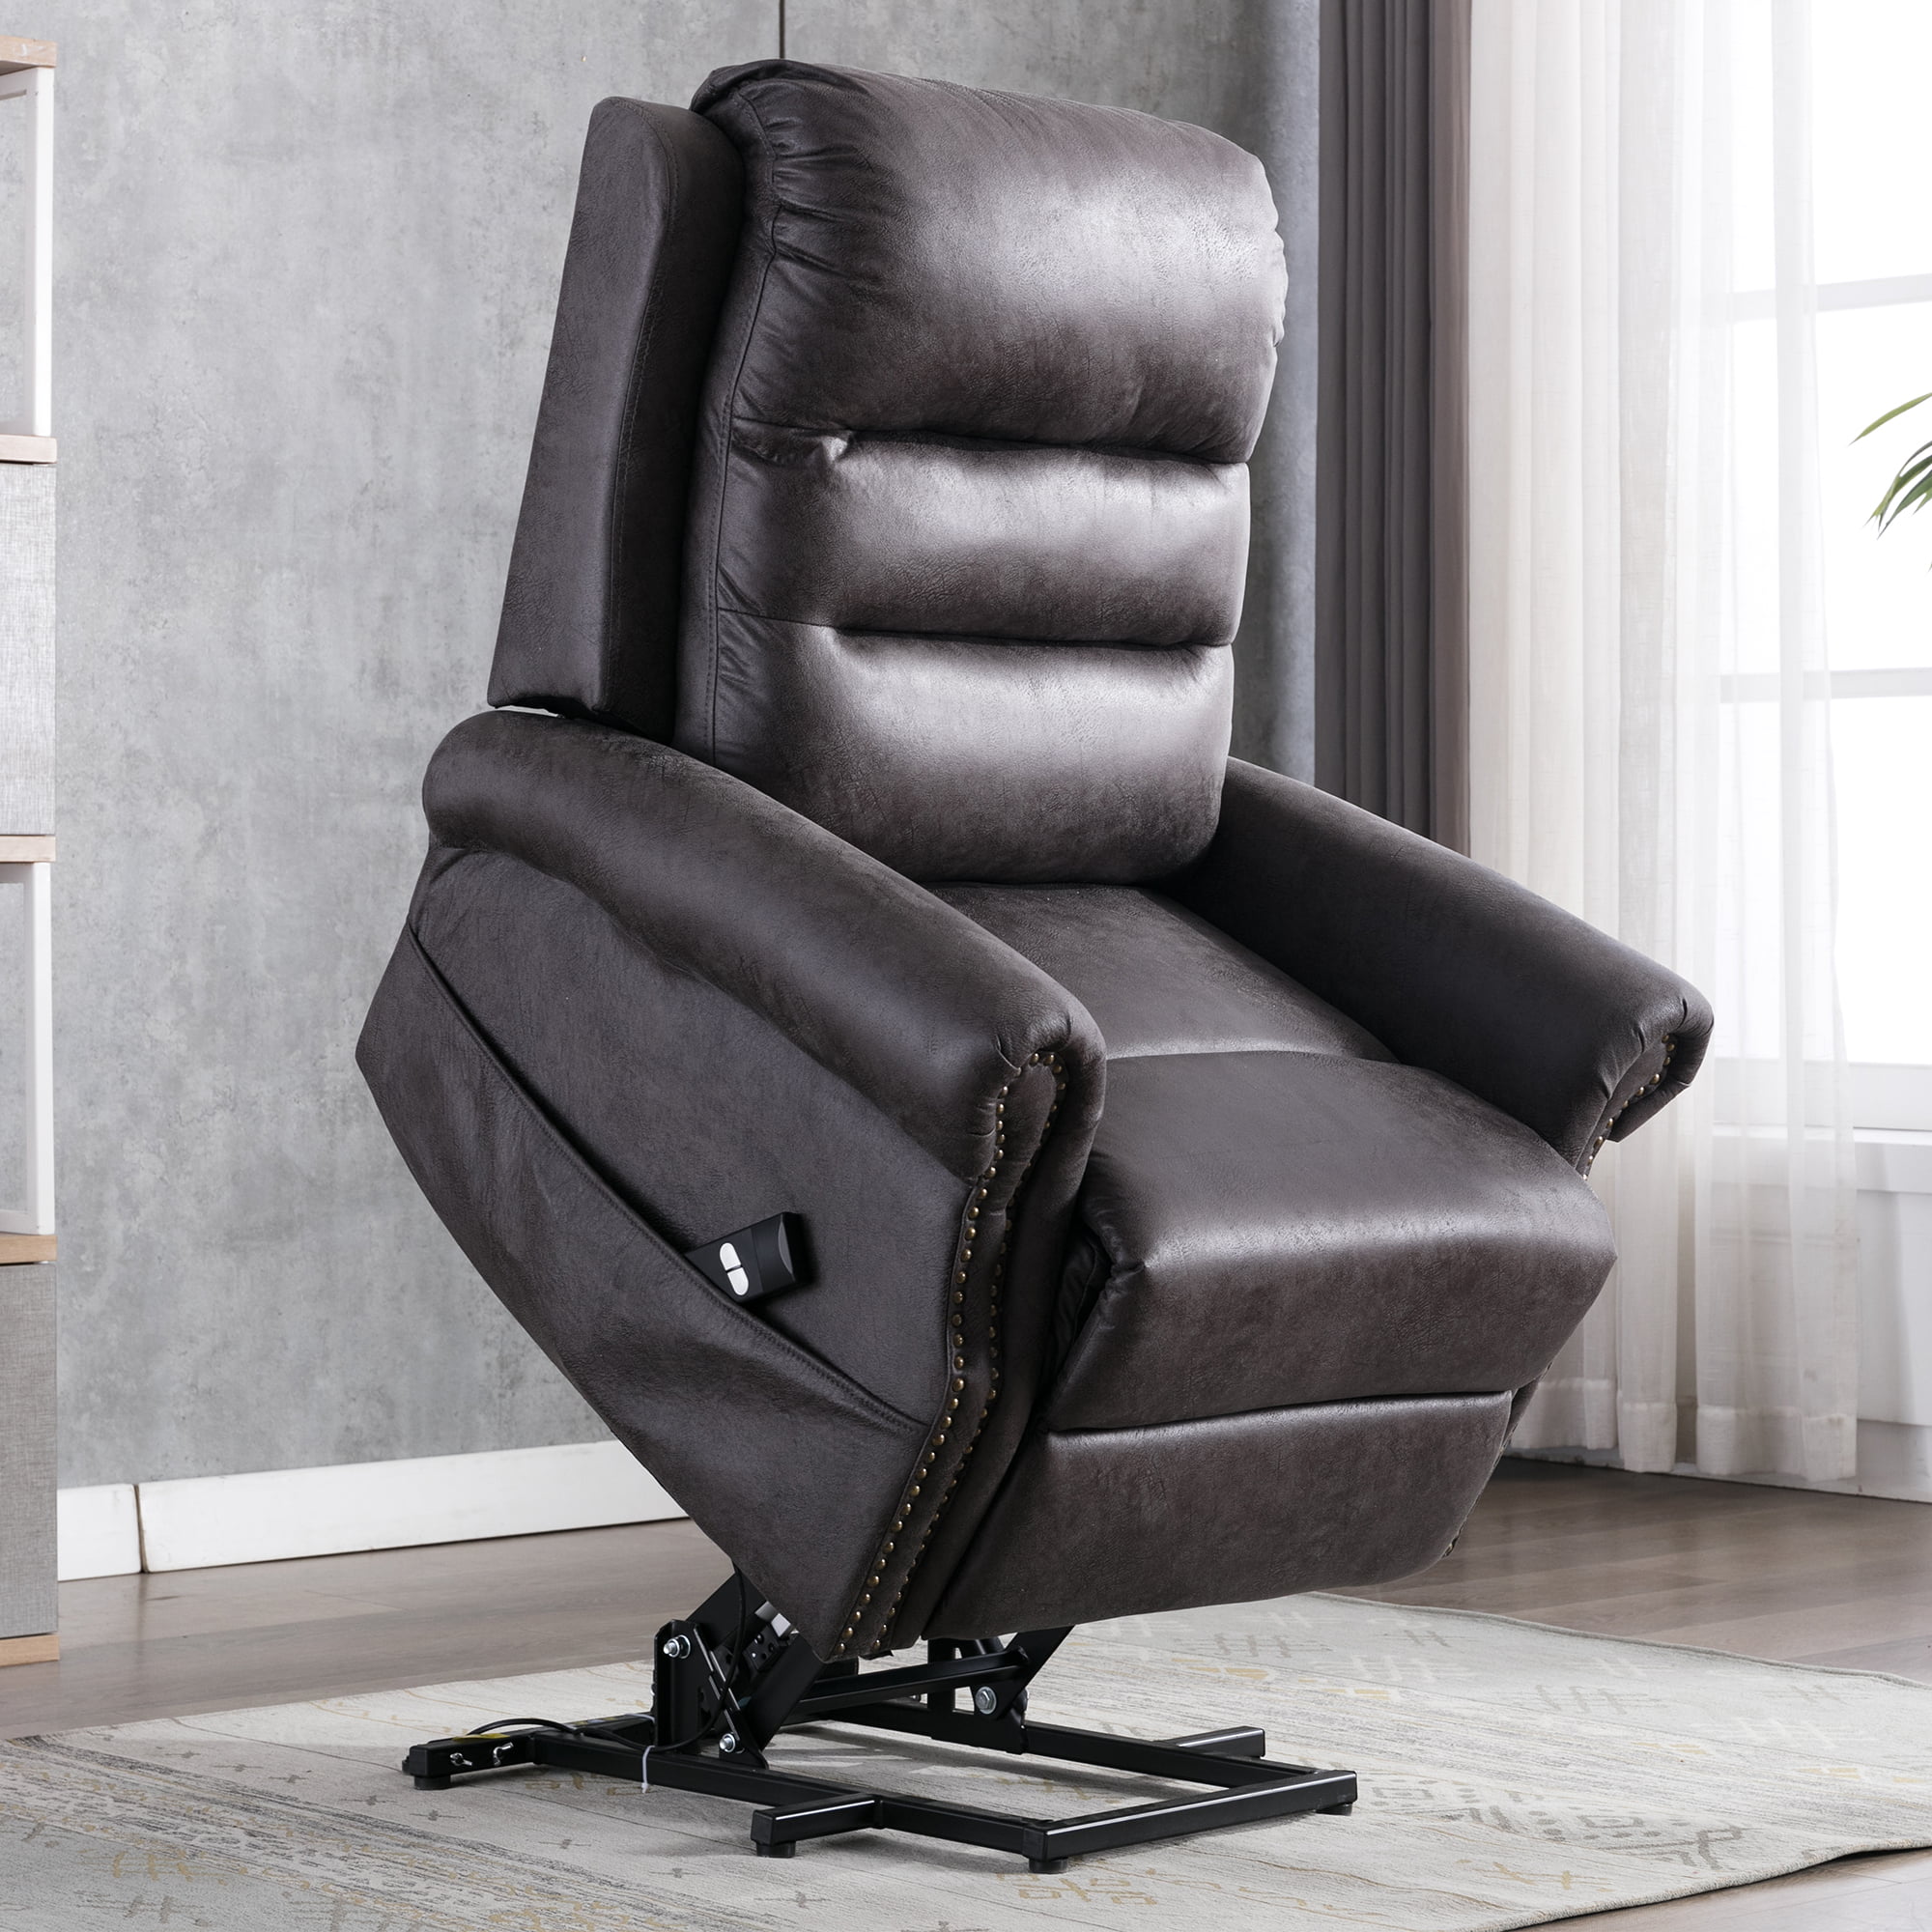 Electric Recliner Chairs for Elderly, Heavy Duty Power Lift Recliners for Elderly, 300 lb ...